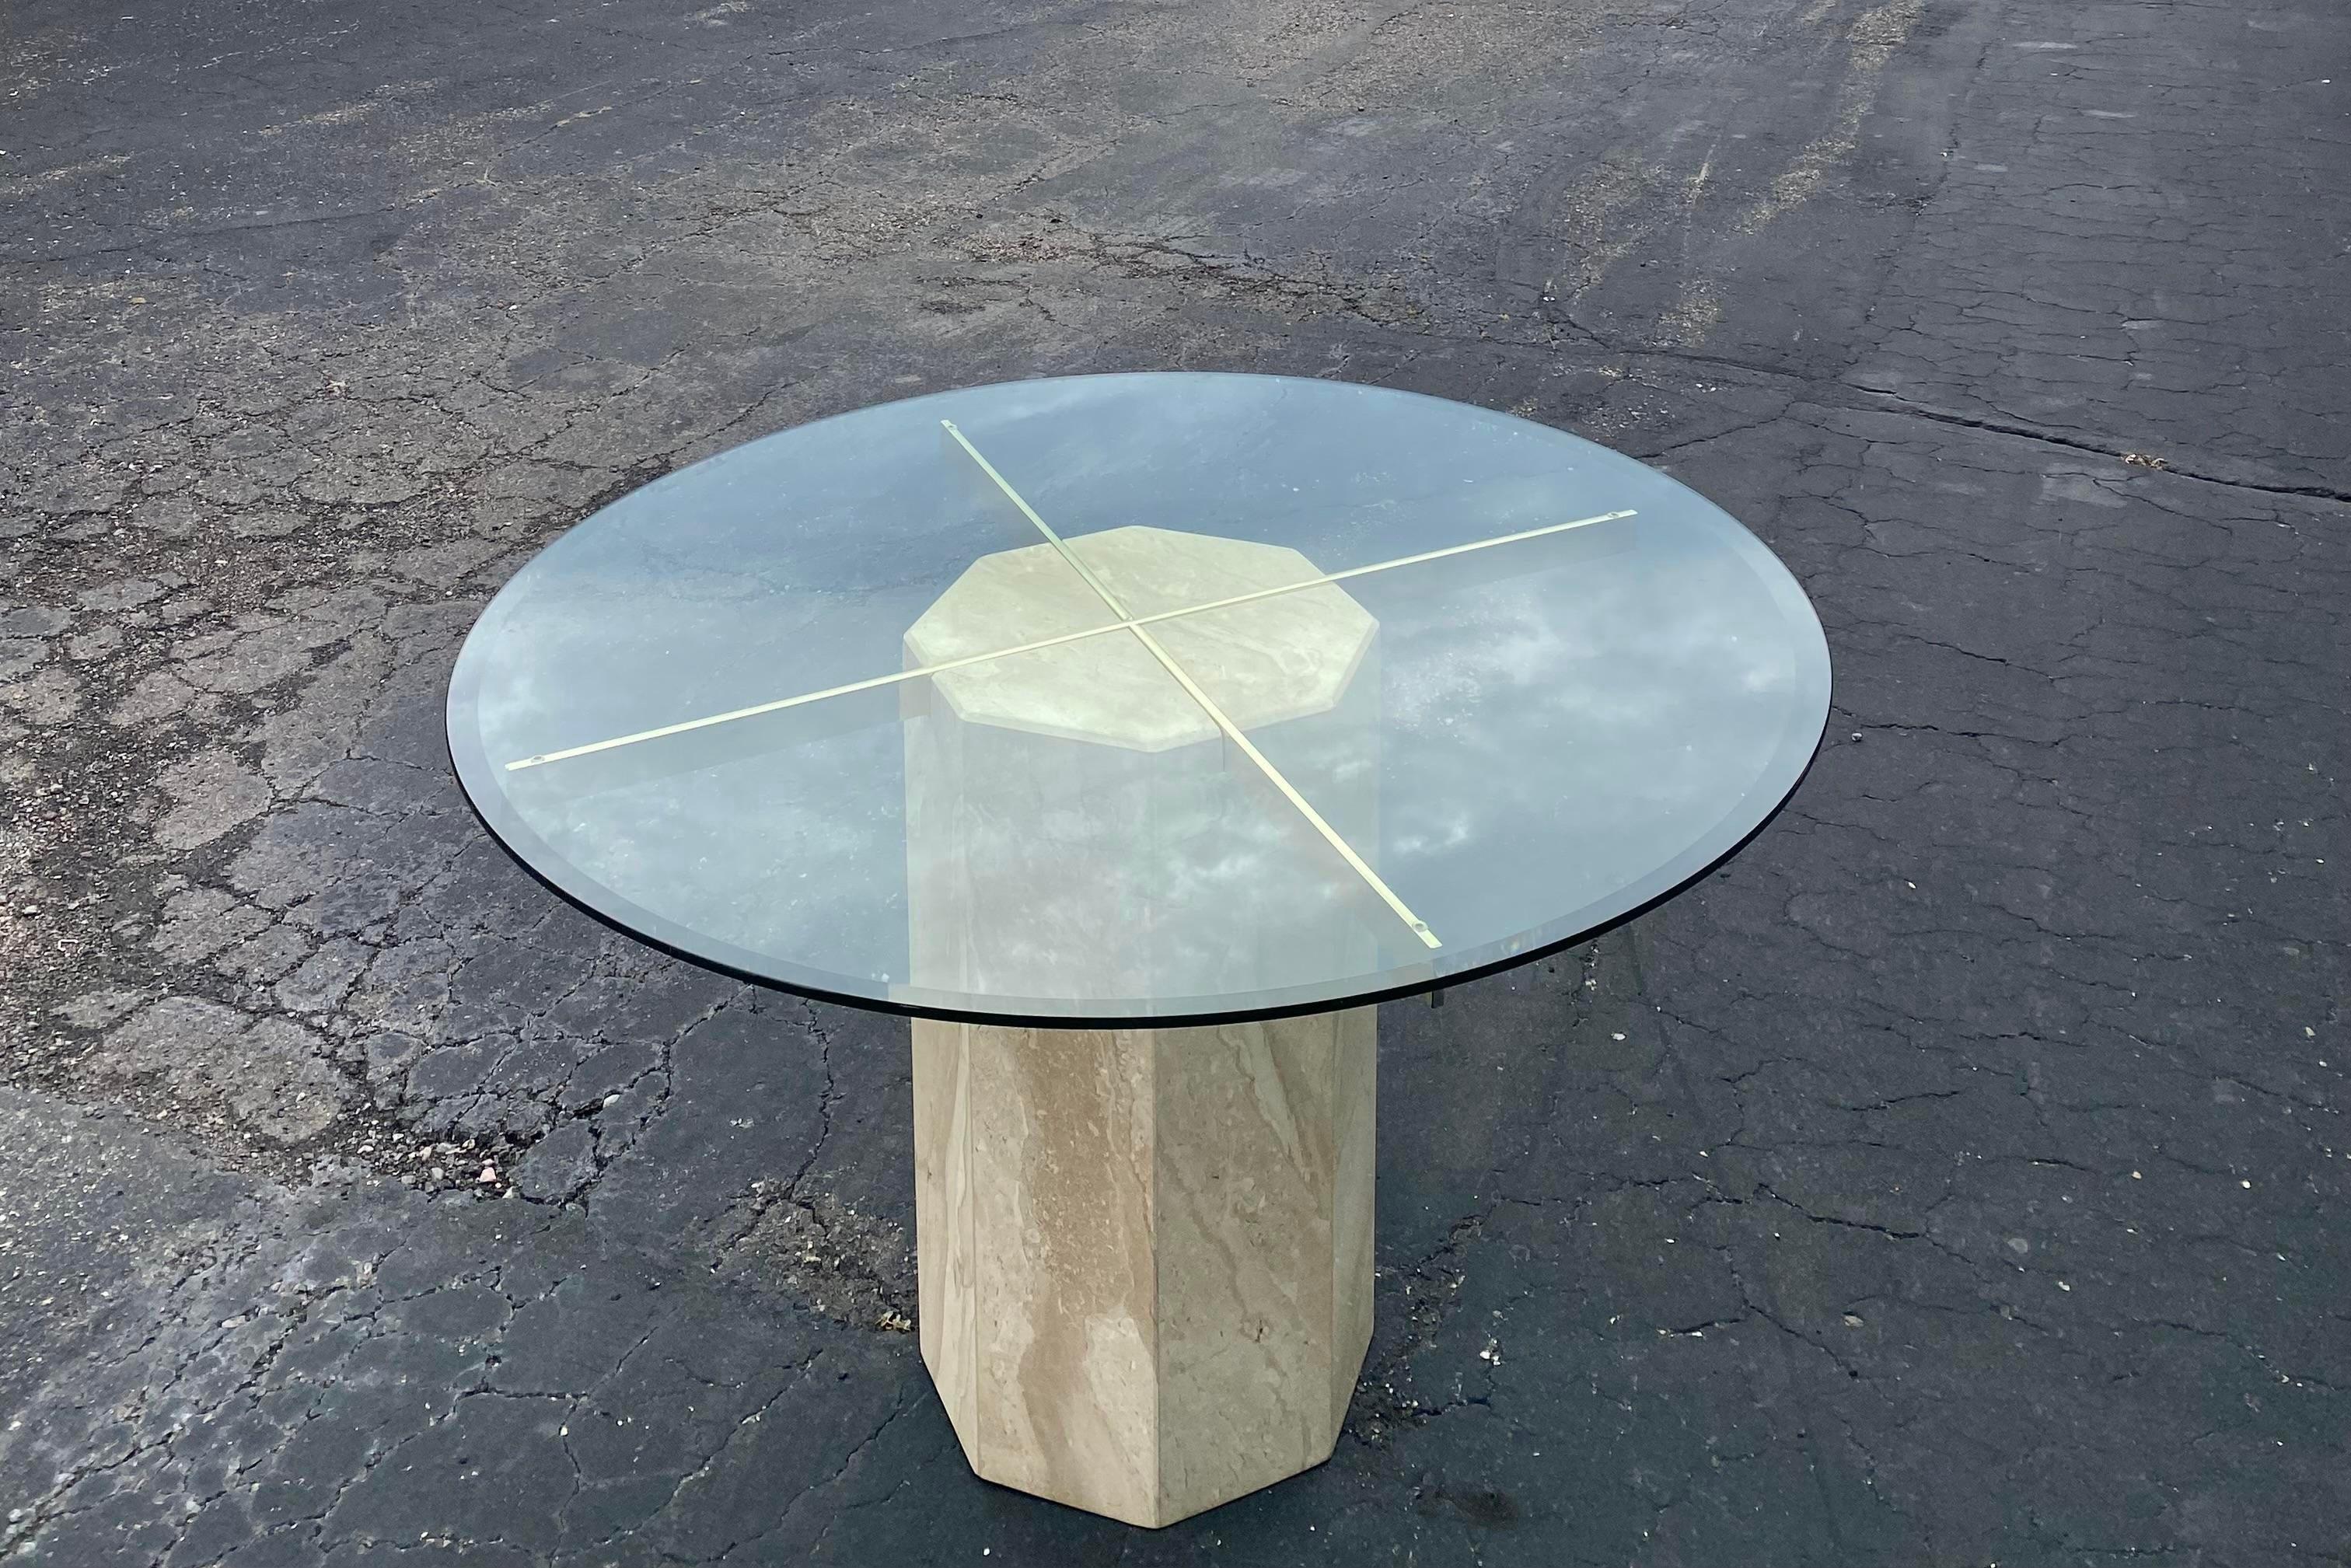 Sleek, Italian marble dining table by Artedi, circa 1980s. Hexagonal marble stone pedestal with brass-plated armatures and a round 48